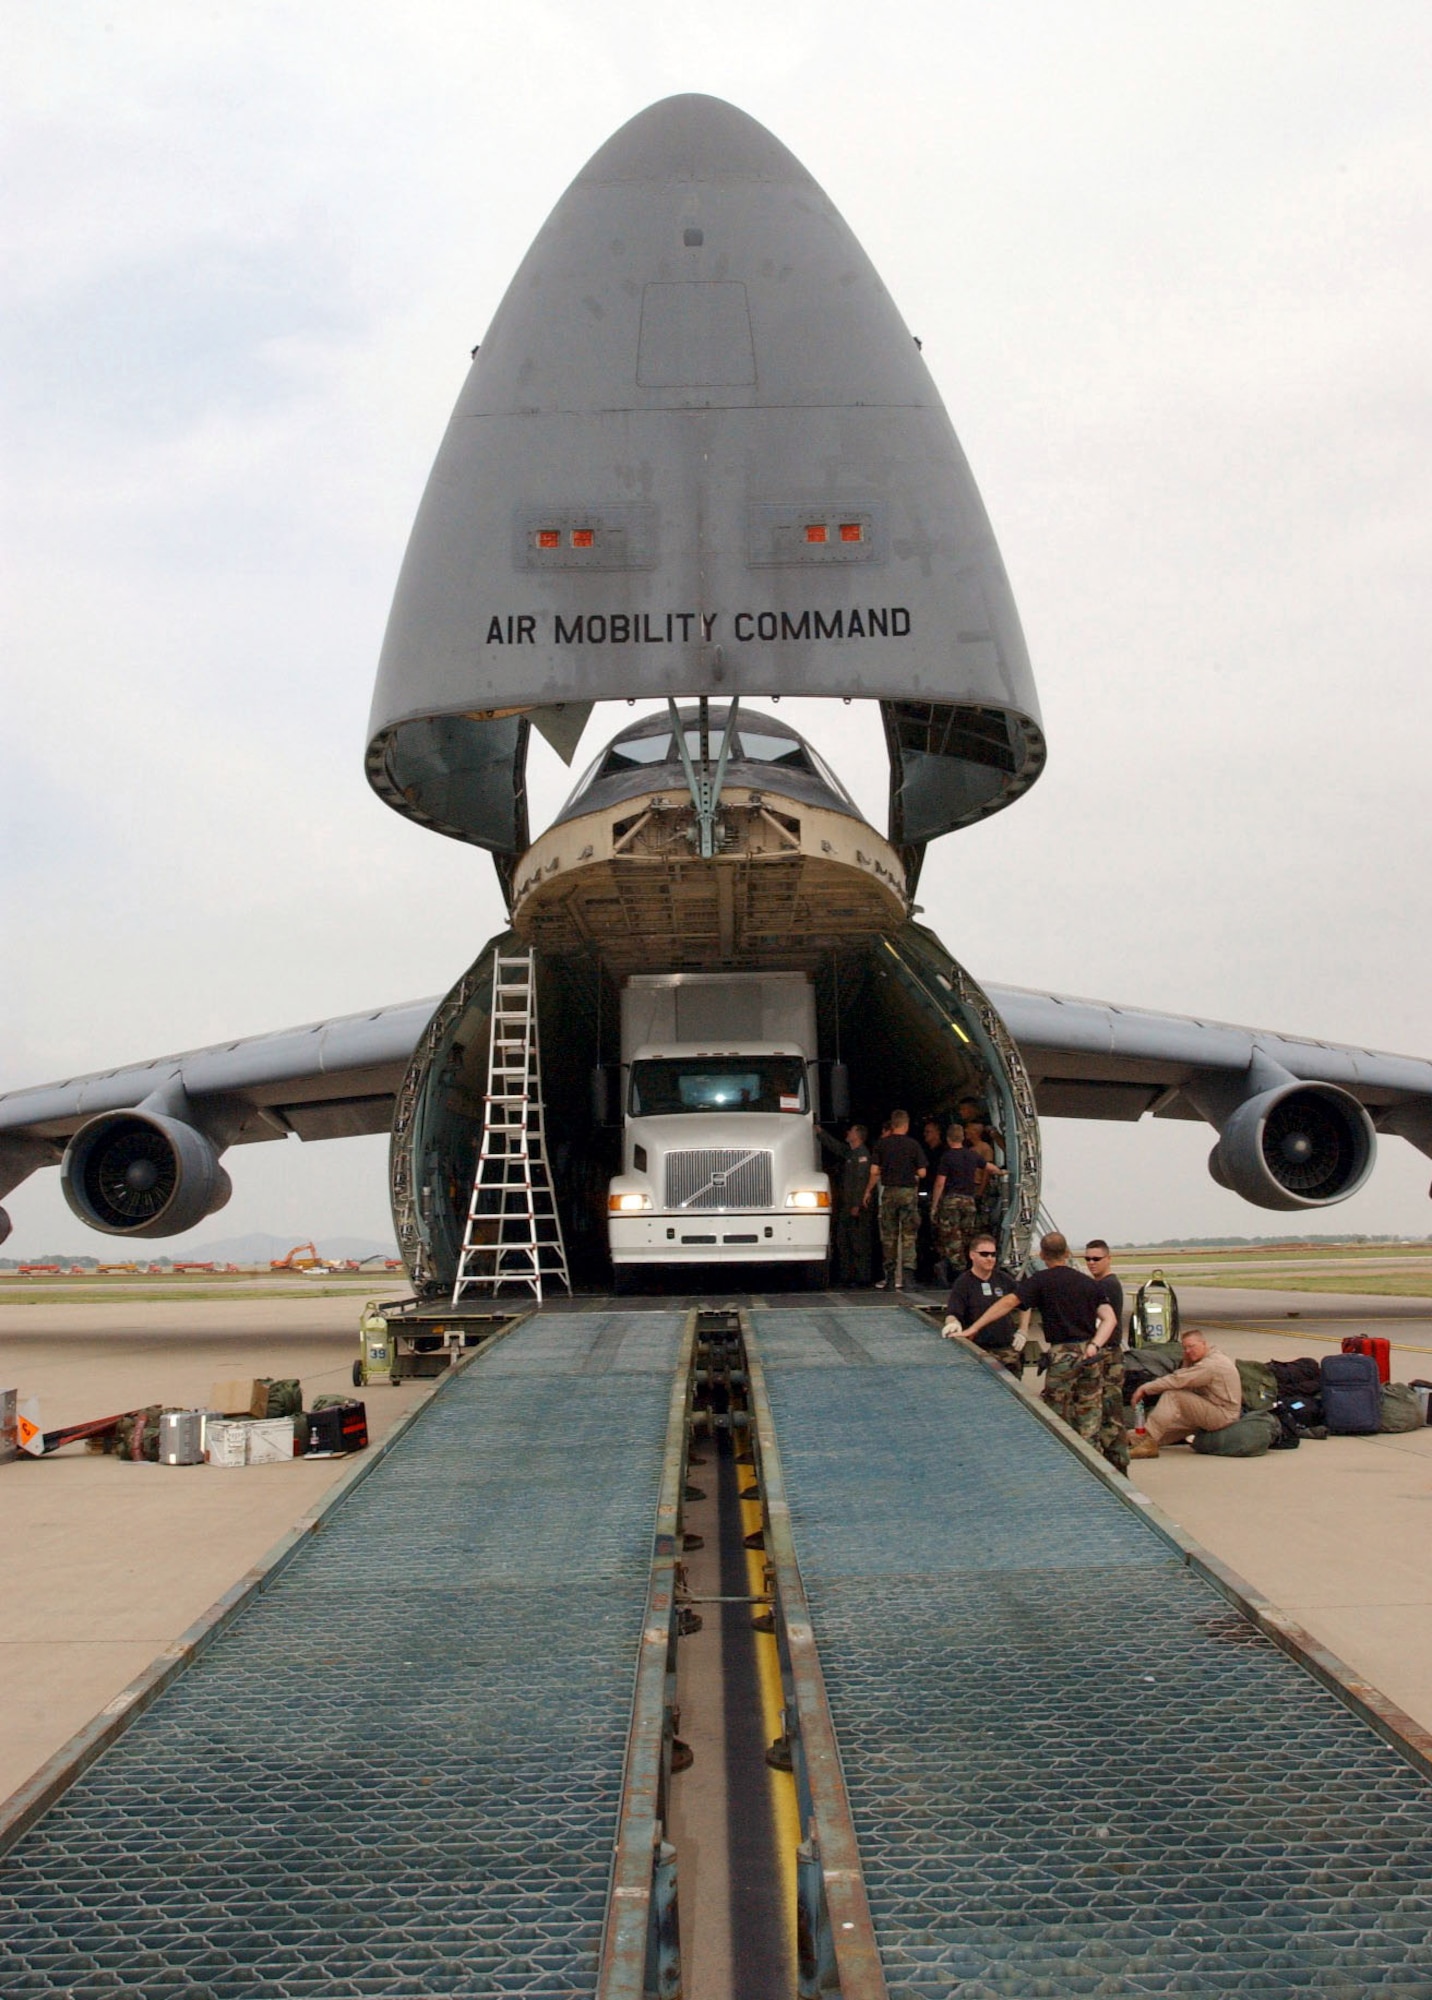 ALTUS AIR FORCE BASE, Okla. -- Crews from the 97th Air Mobility Wing here and the 60th AMW at Travis Air Force Base, Calif., load a semitrailer carrying humanitarian cargo into a C-5 Galaxy for delivery to a forward-deployed location supporting Operation Iraqi Freedom.  With clearance coming as close as 4 inches at one point, the trailer took about five hours to load using a Minuteman Missile ramp.  The C-5 is assigned to the 60th AMW.  (U.S. Air Force photo by Airman 1st Class Kristi Hare)